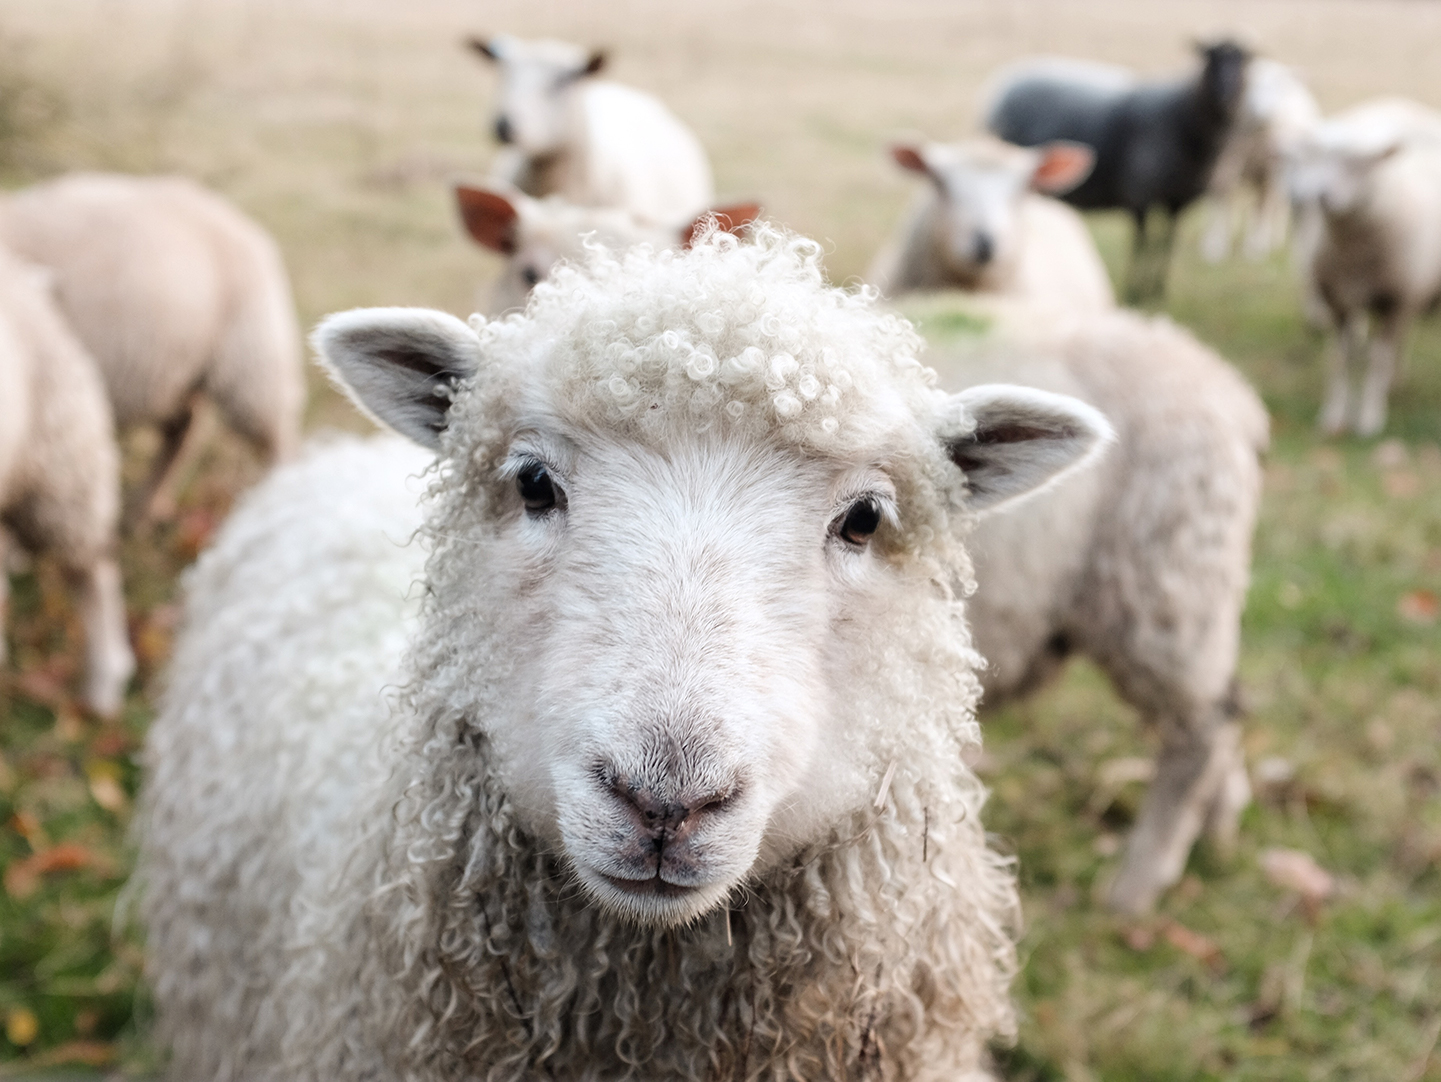 Closeup picture of a sheep in the midst of the flock